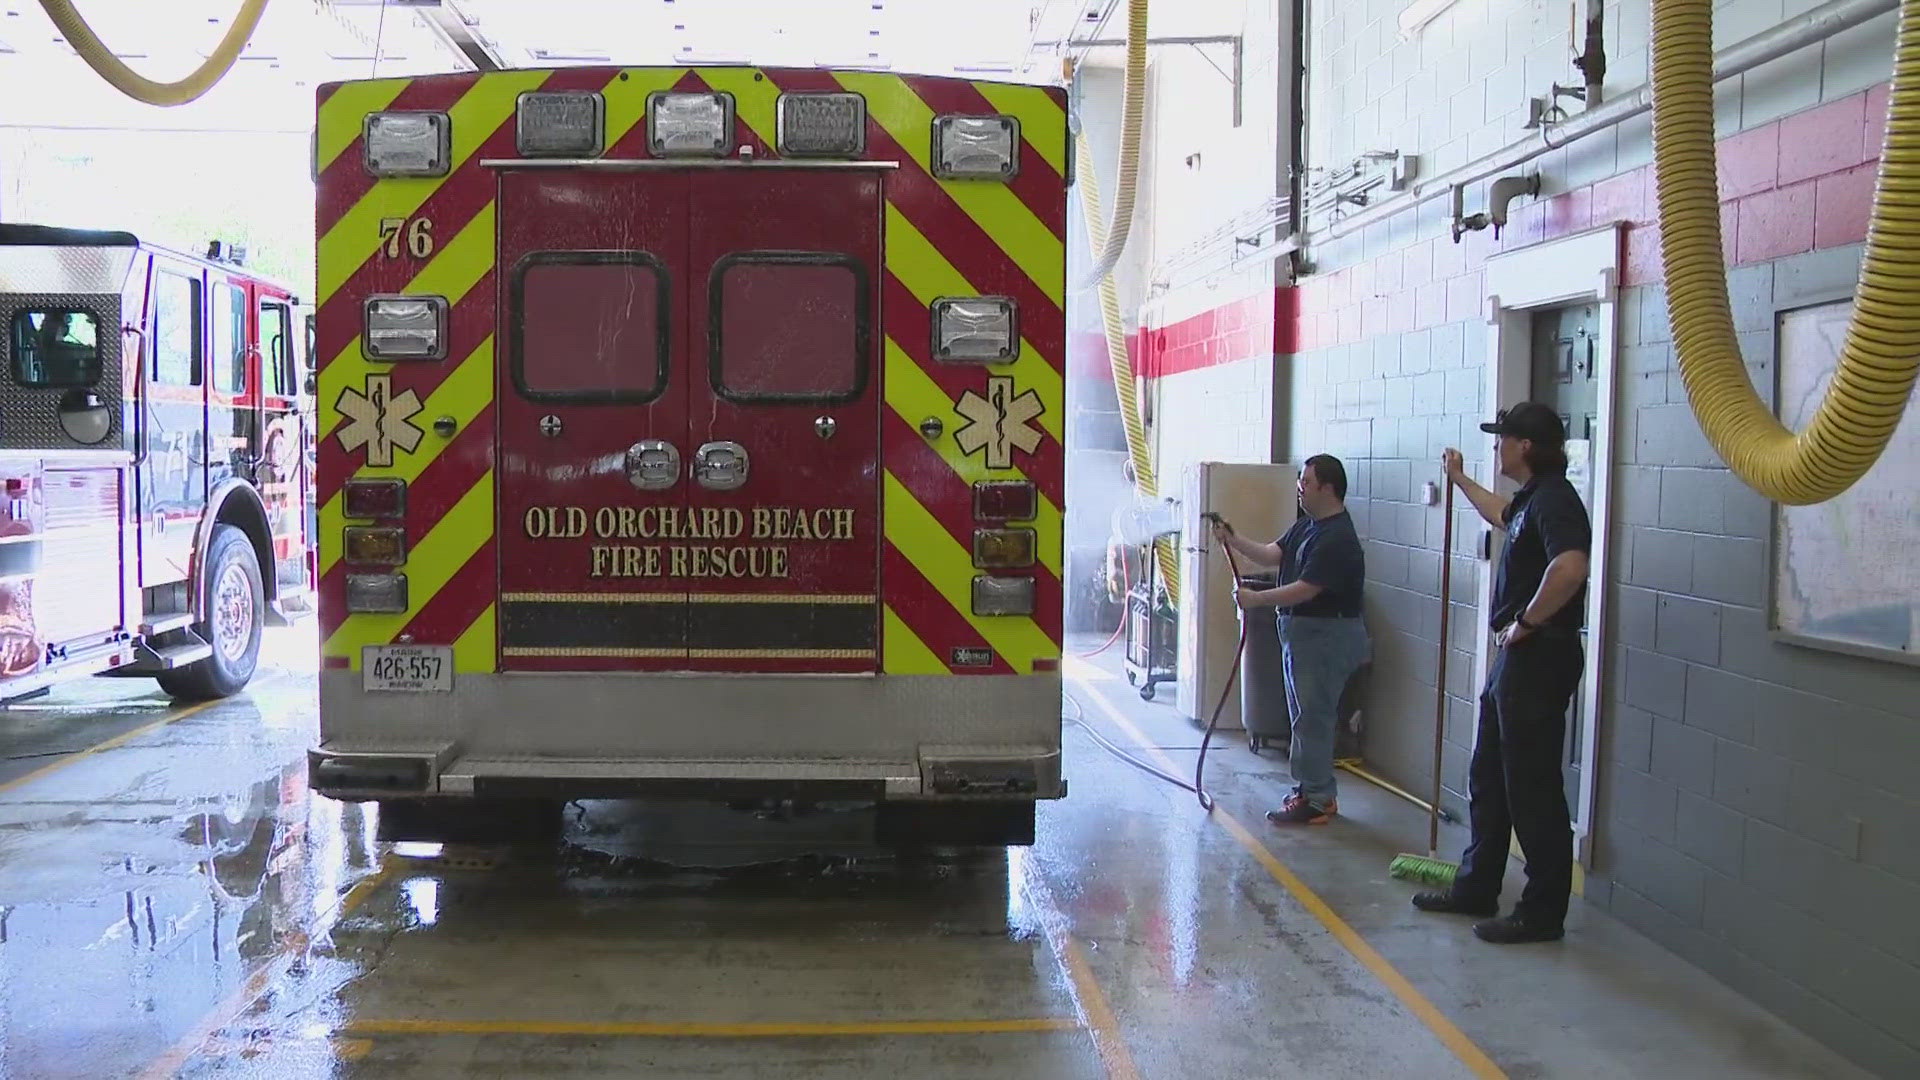 Nicholas Watkins has Down syndrome and has been a volunteer with the Old Orchard Beach Fire Department for 11 years.